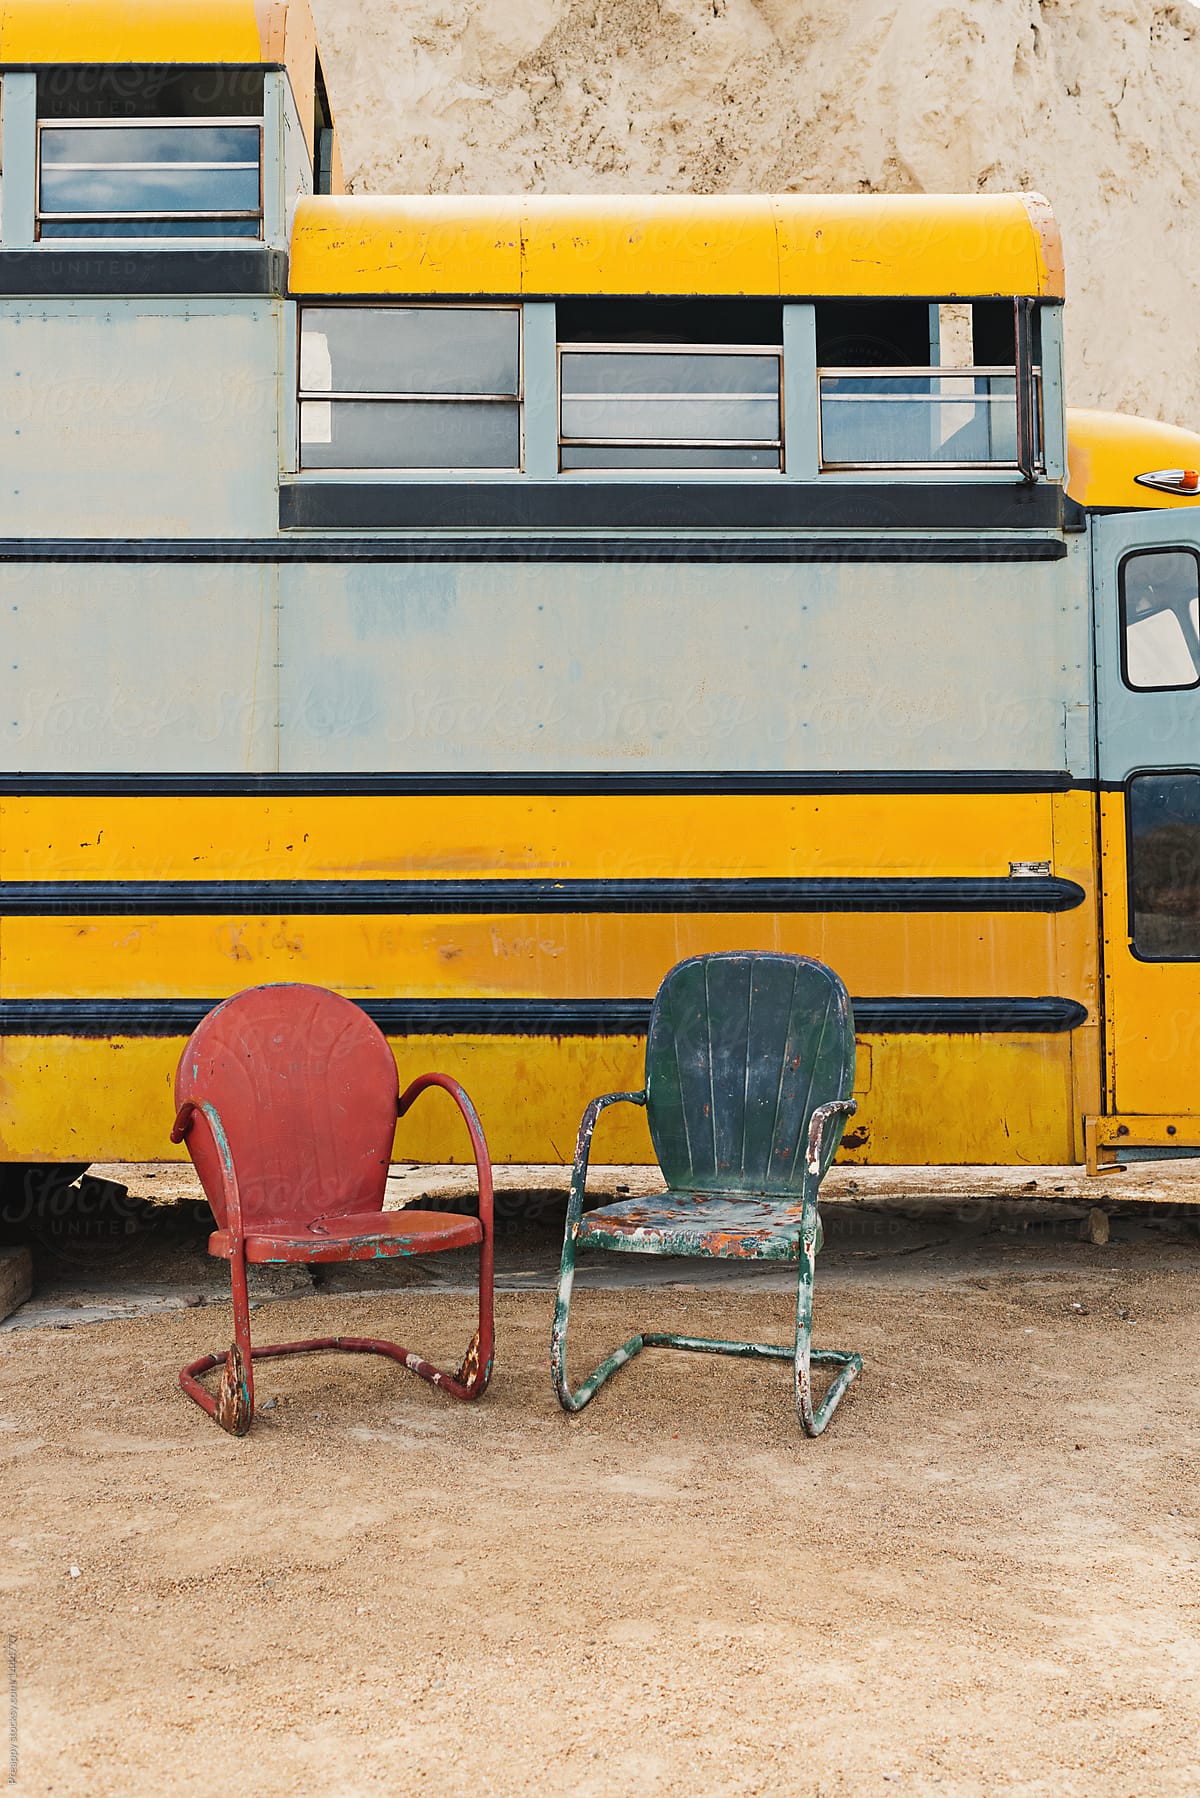 Two metal chairs outdoors against school bus